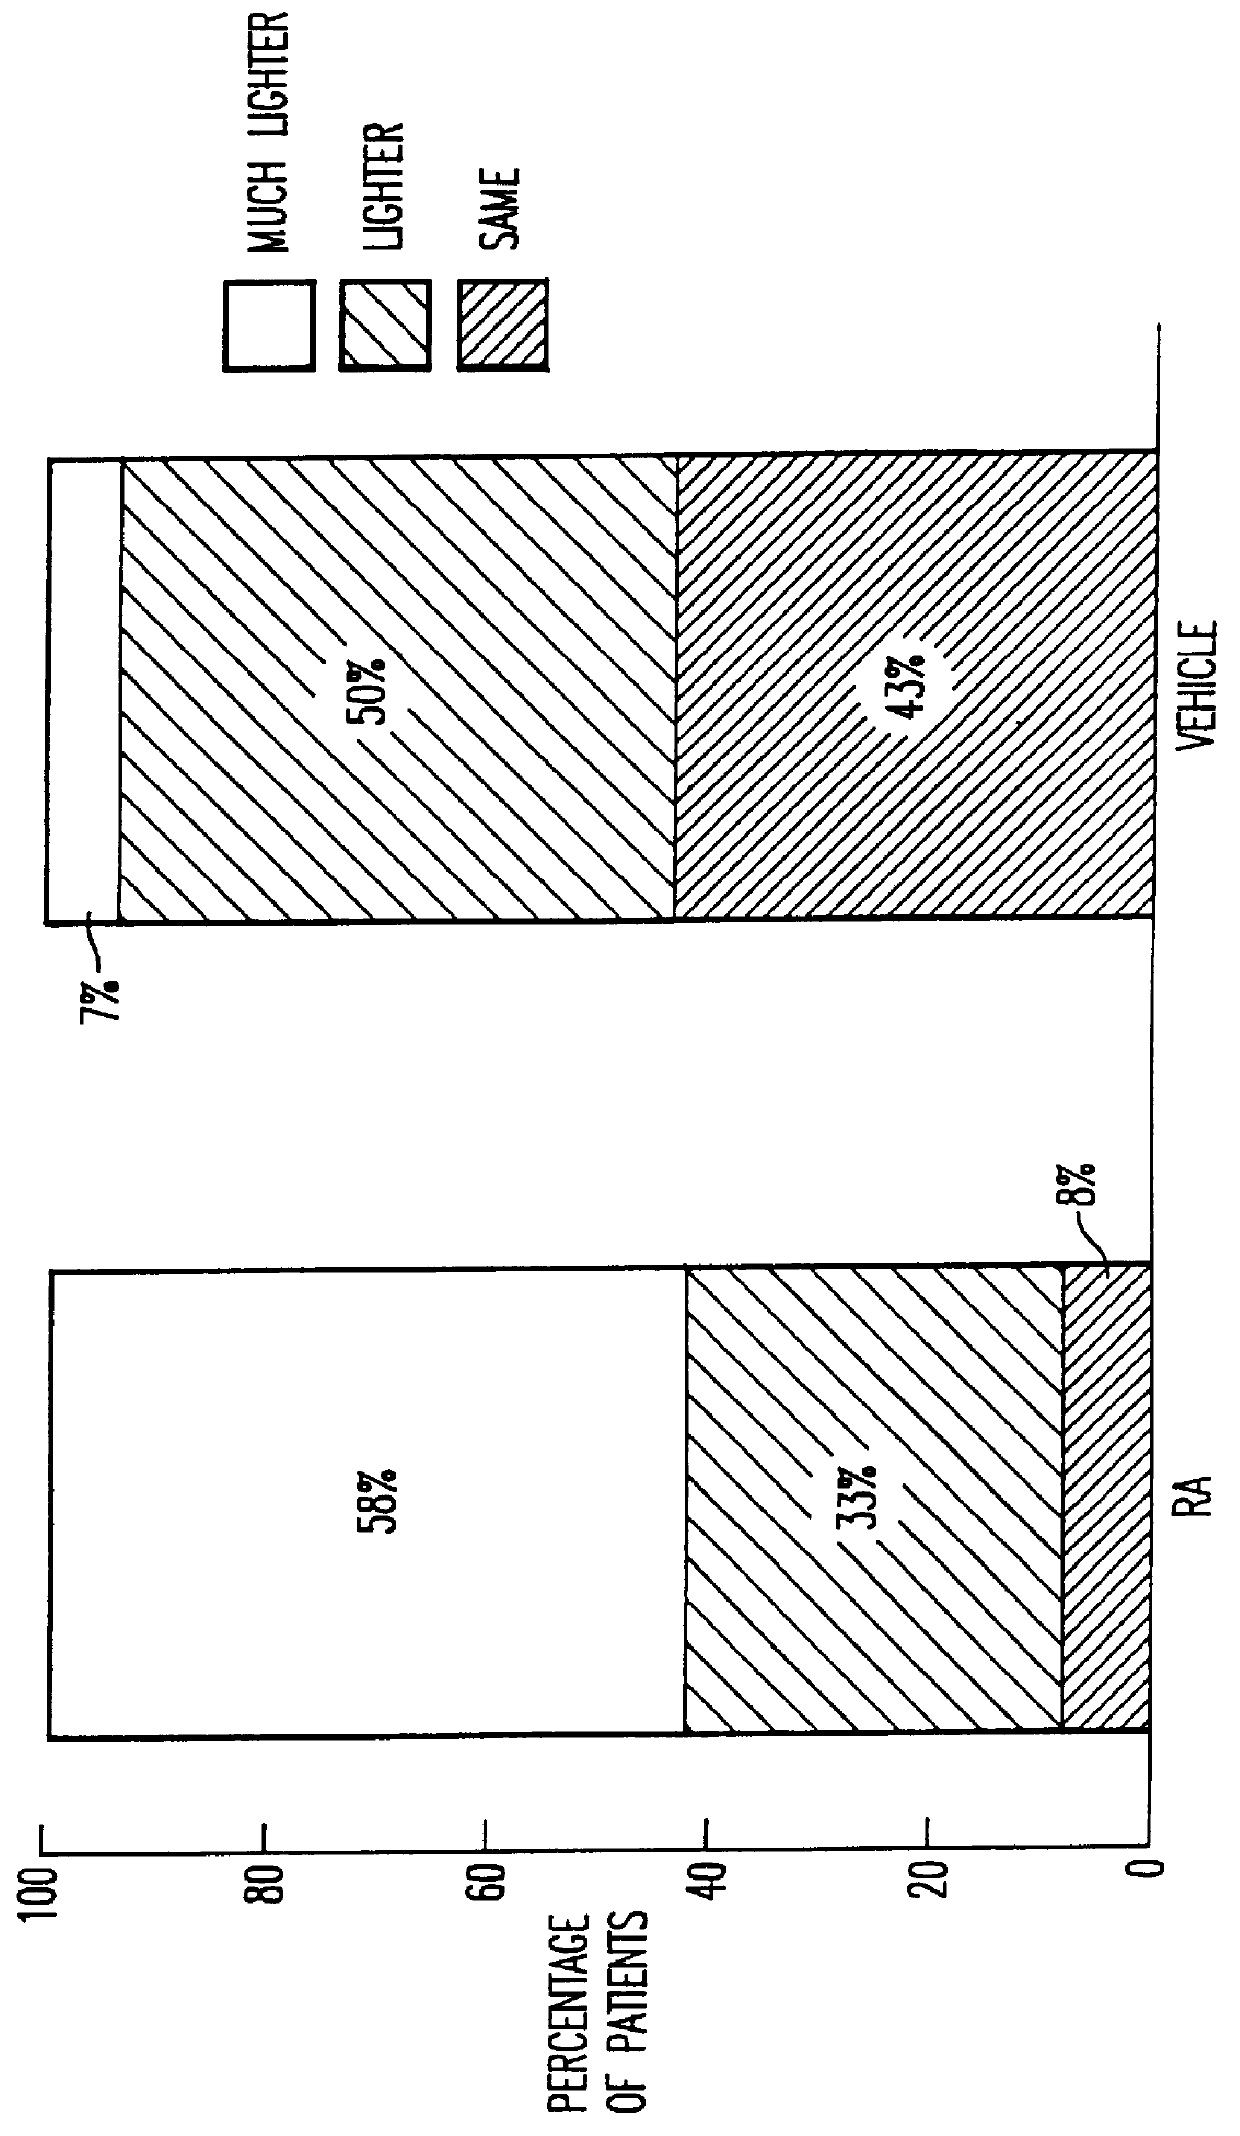 Method of treating post-inflammatory hyperpigmentation in black skin with a retinoid, and method of lightening black skin with a retinoid